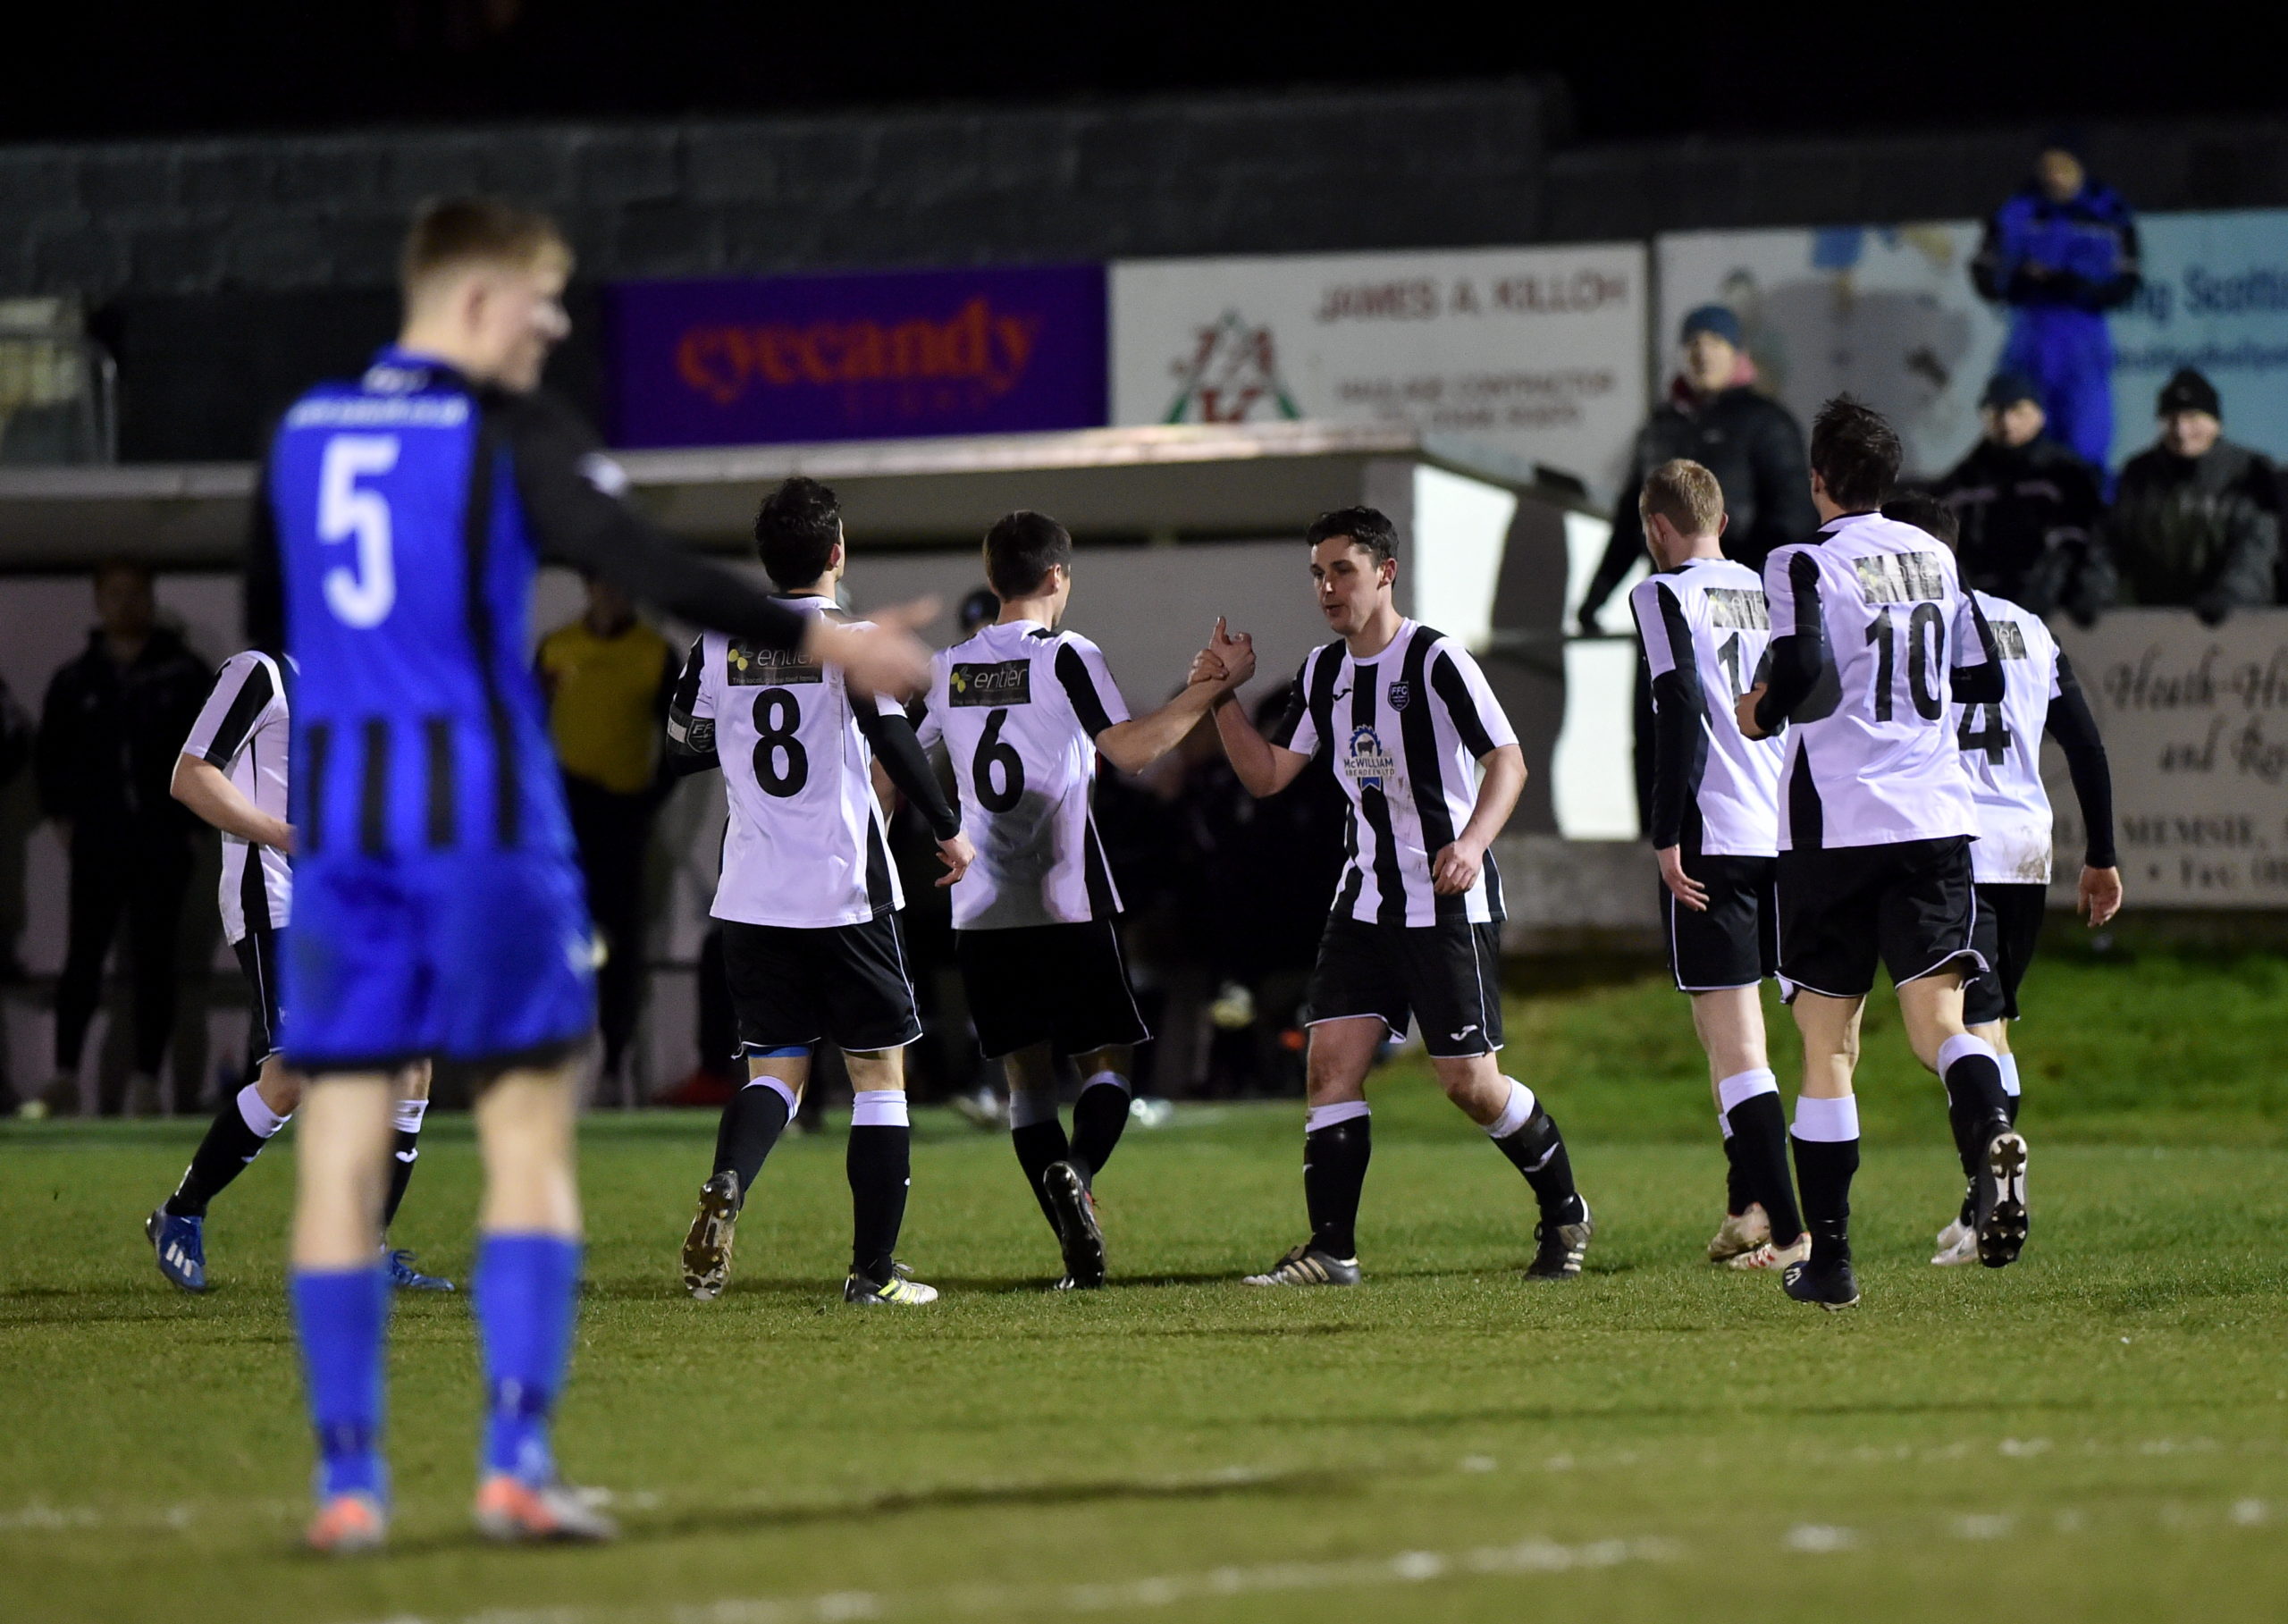 Grant Campbell celebrates his goal with team-mates.
Picture by Scott Baxter